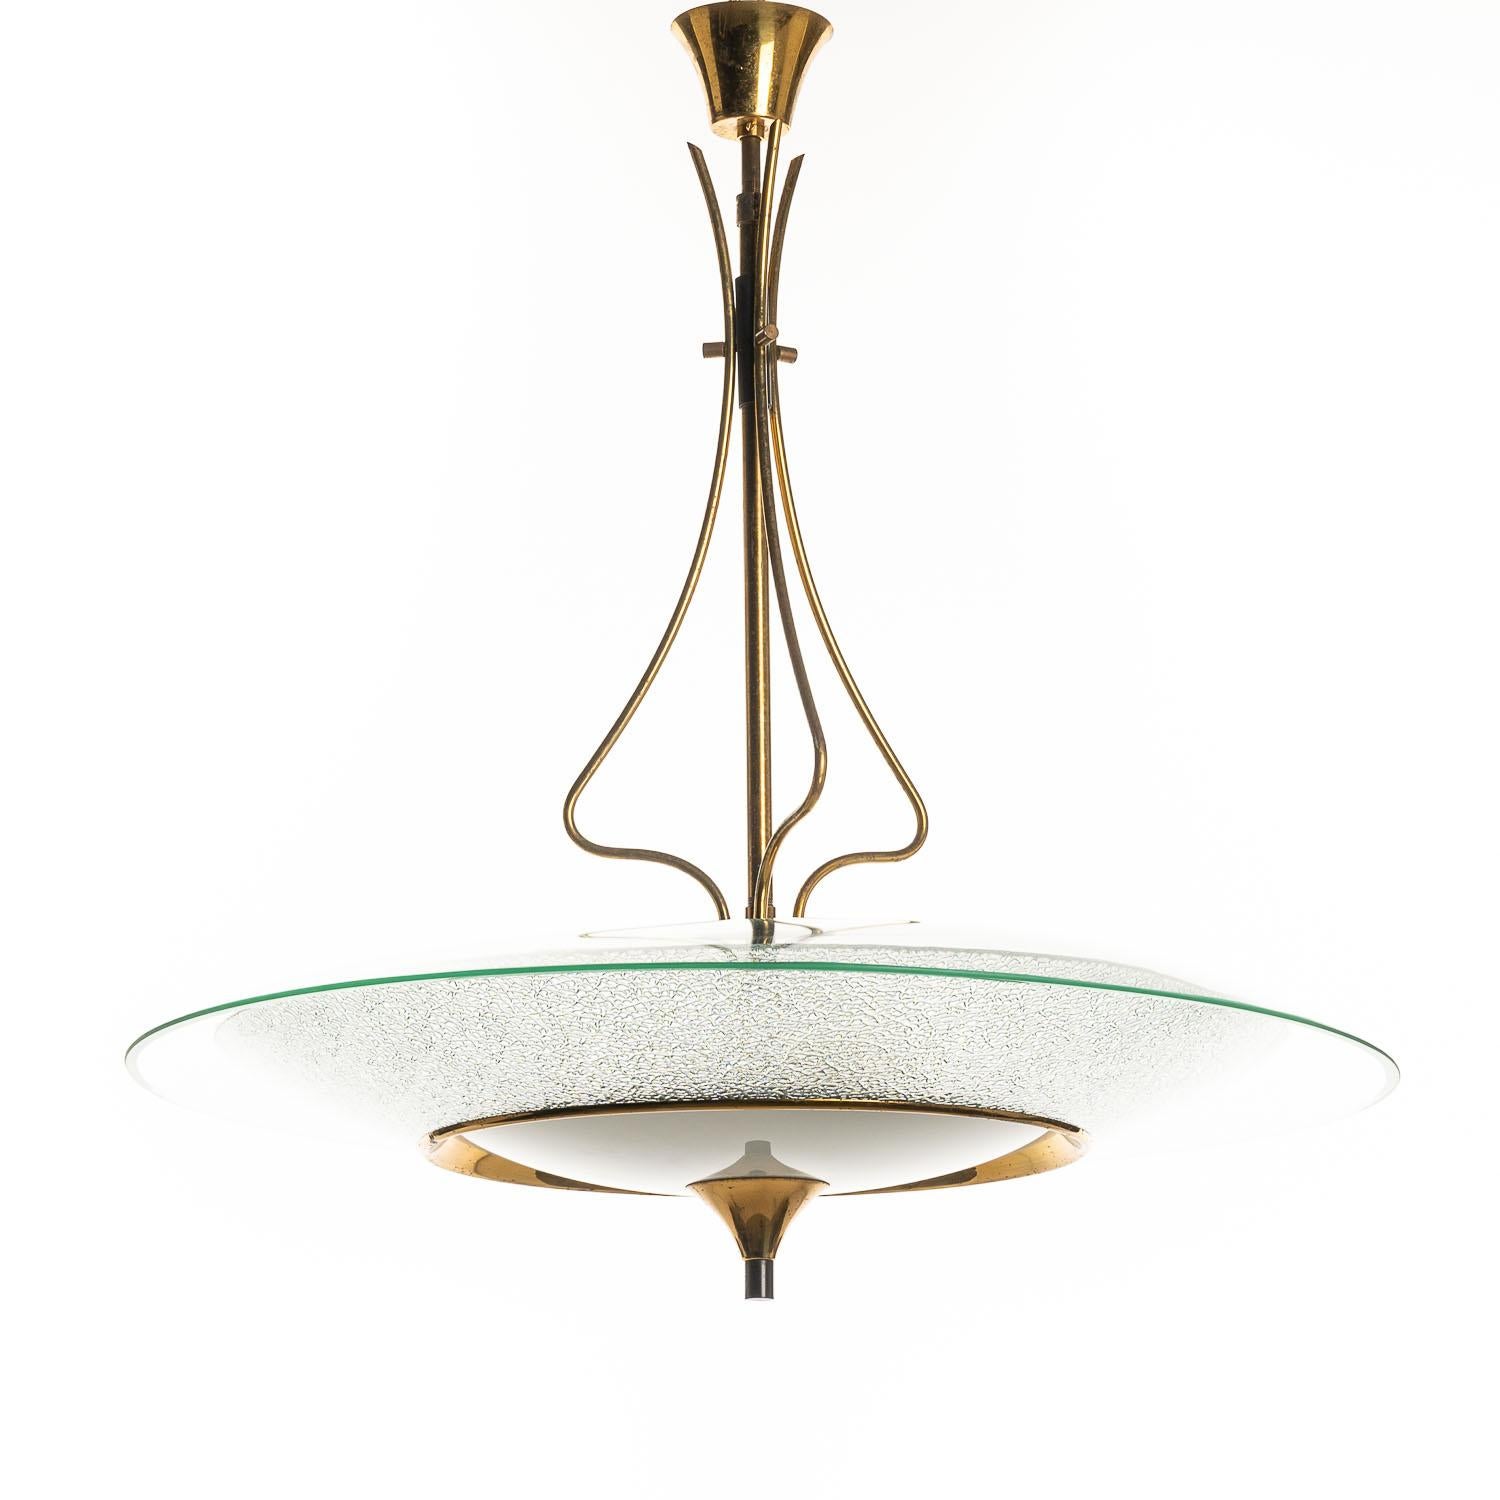 This Fontana Arte-inspired hanging pendant lamp is the perfect piece for those looking to capture a slice of the mid-century design ethos. Understated at first glance, yet full of character and charm the more you learn. This lamp has a stunning